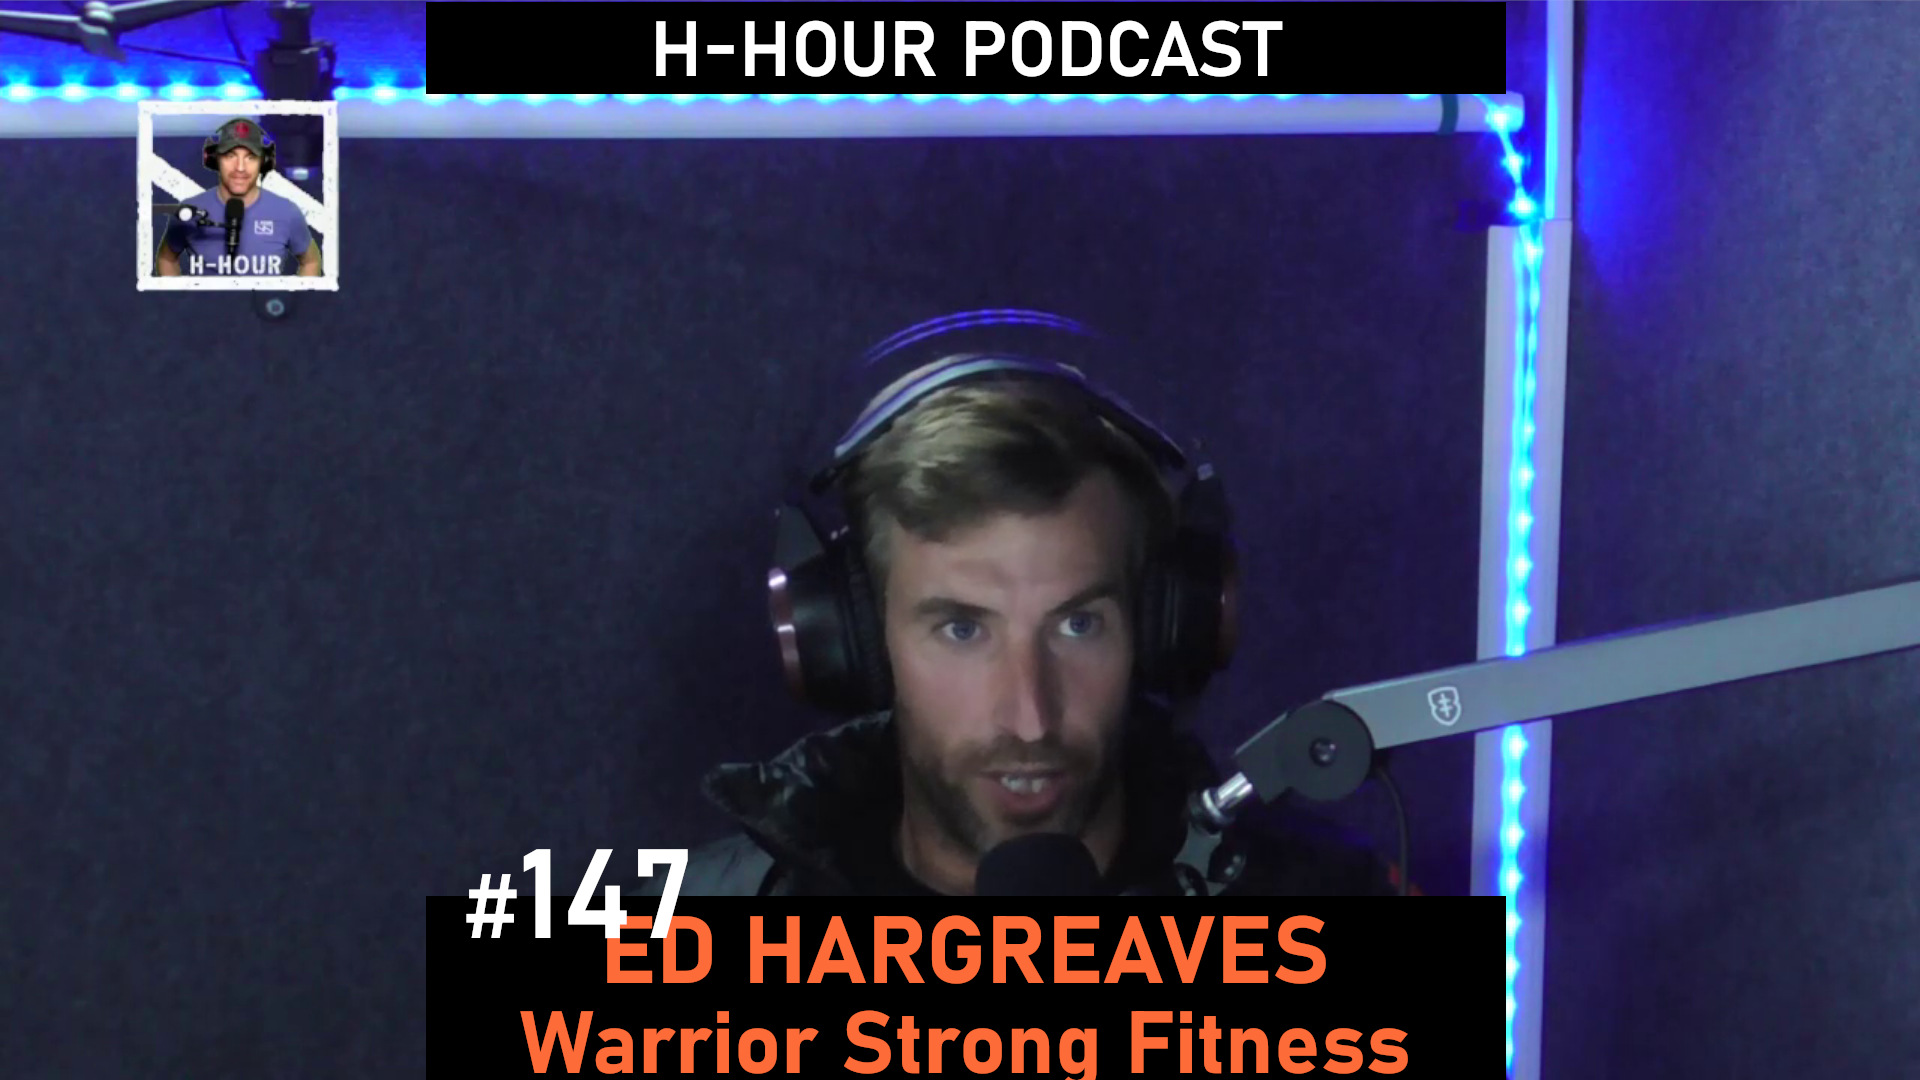 #147 ed hargreaves h-hour Podcast cover image